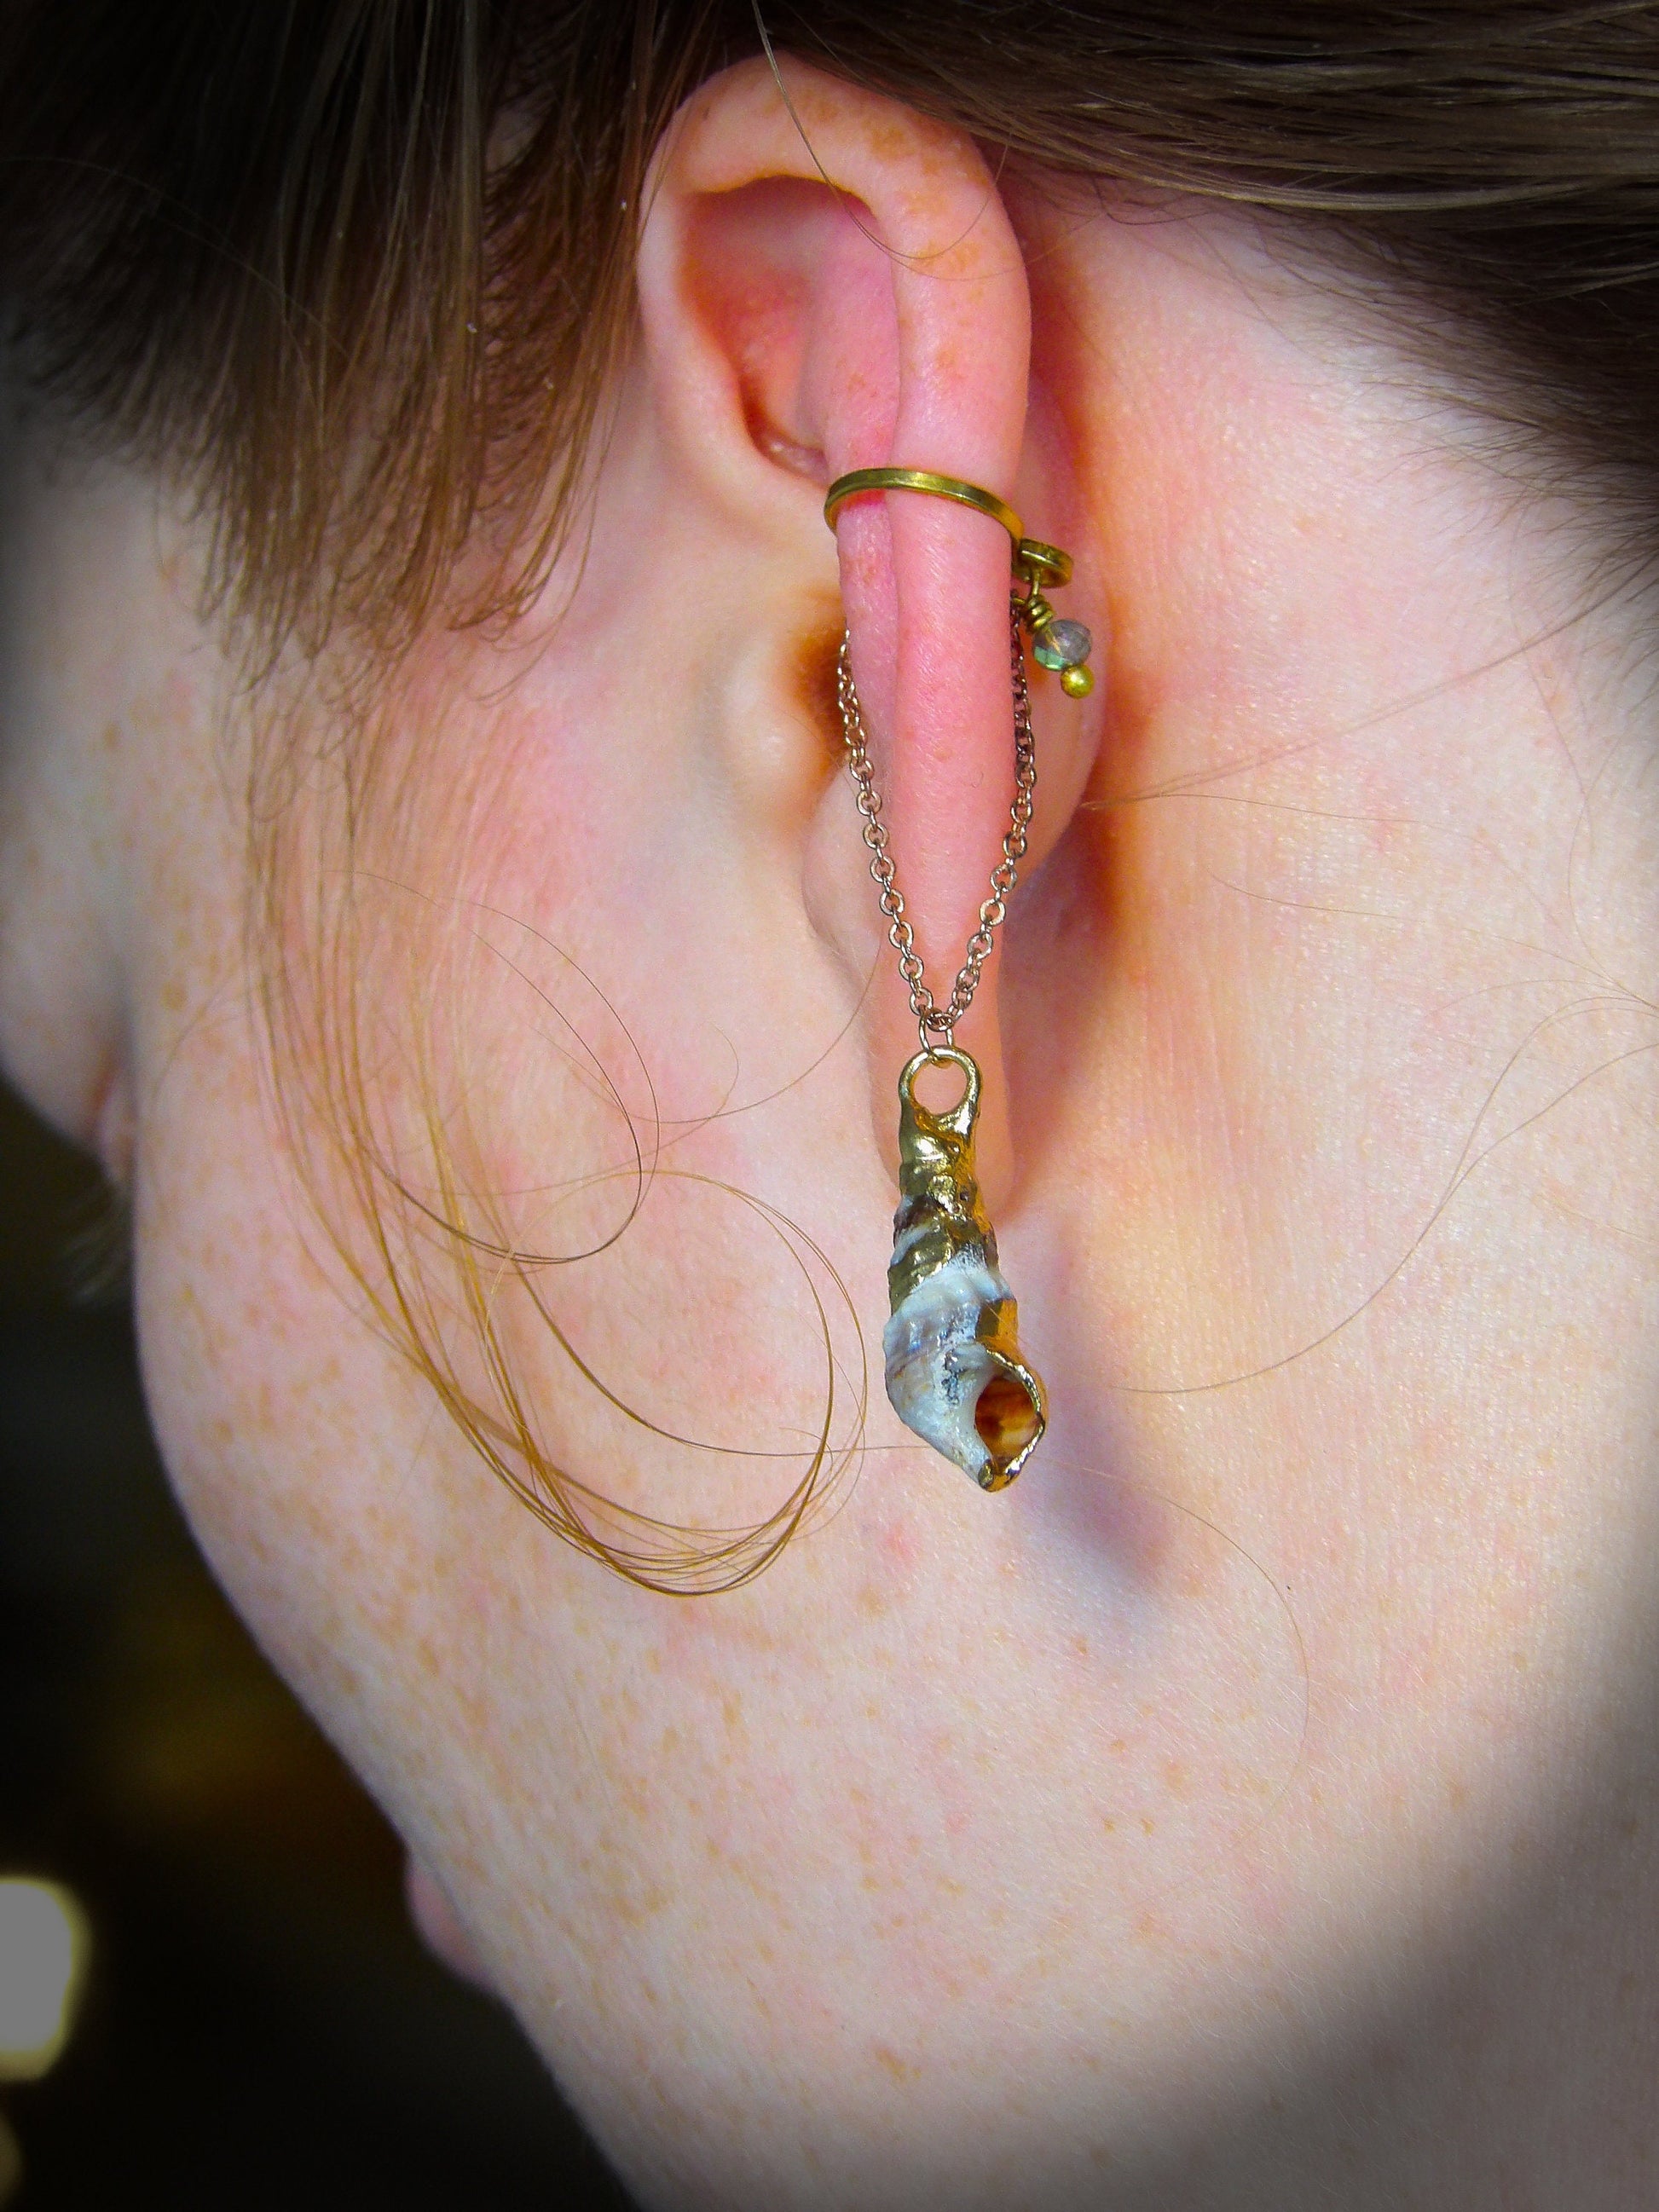 Ear Cuff No Piercing With Labradorite & Seashell | Earcuff No Piercing With Chain | Ethical Jewelry | Boho Siren Jewelry | Meaningful Gifts